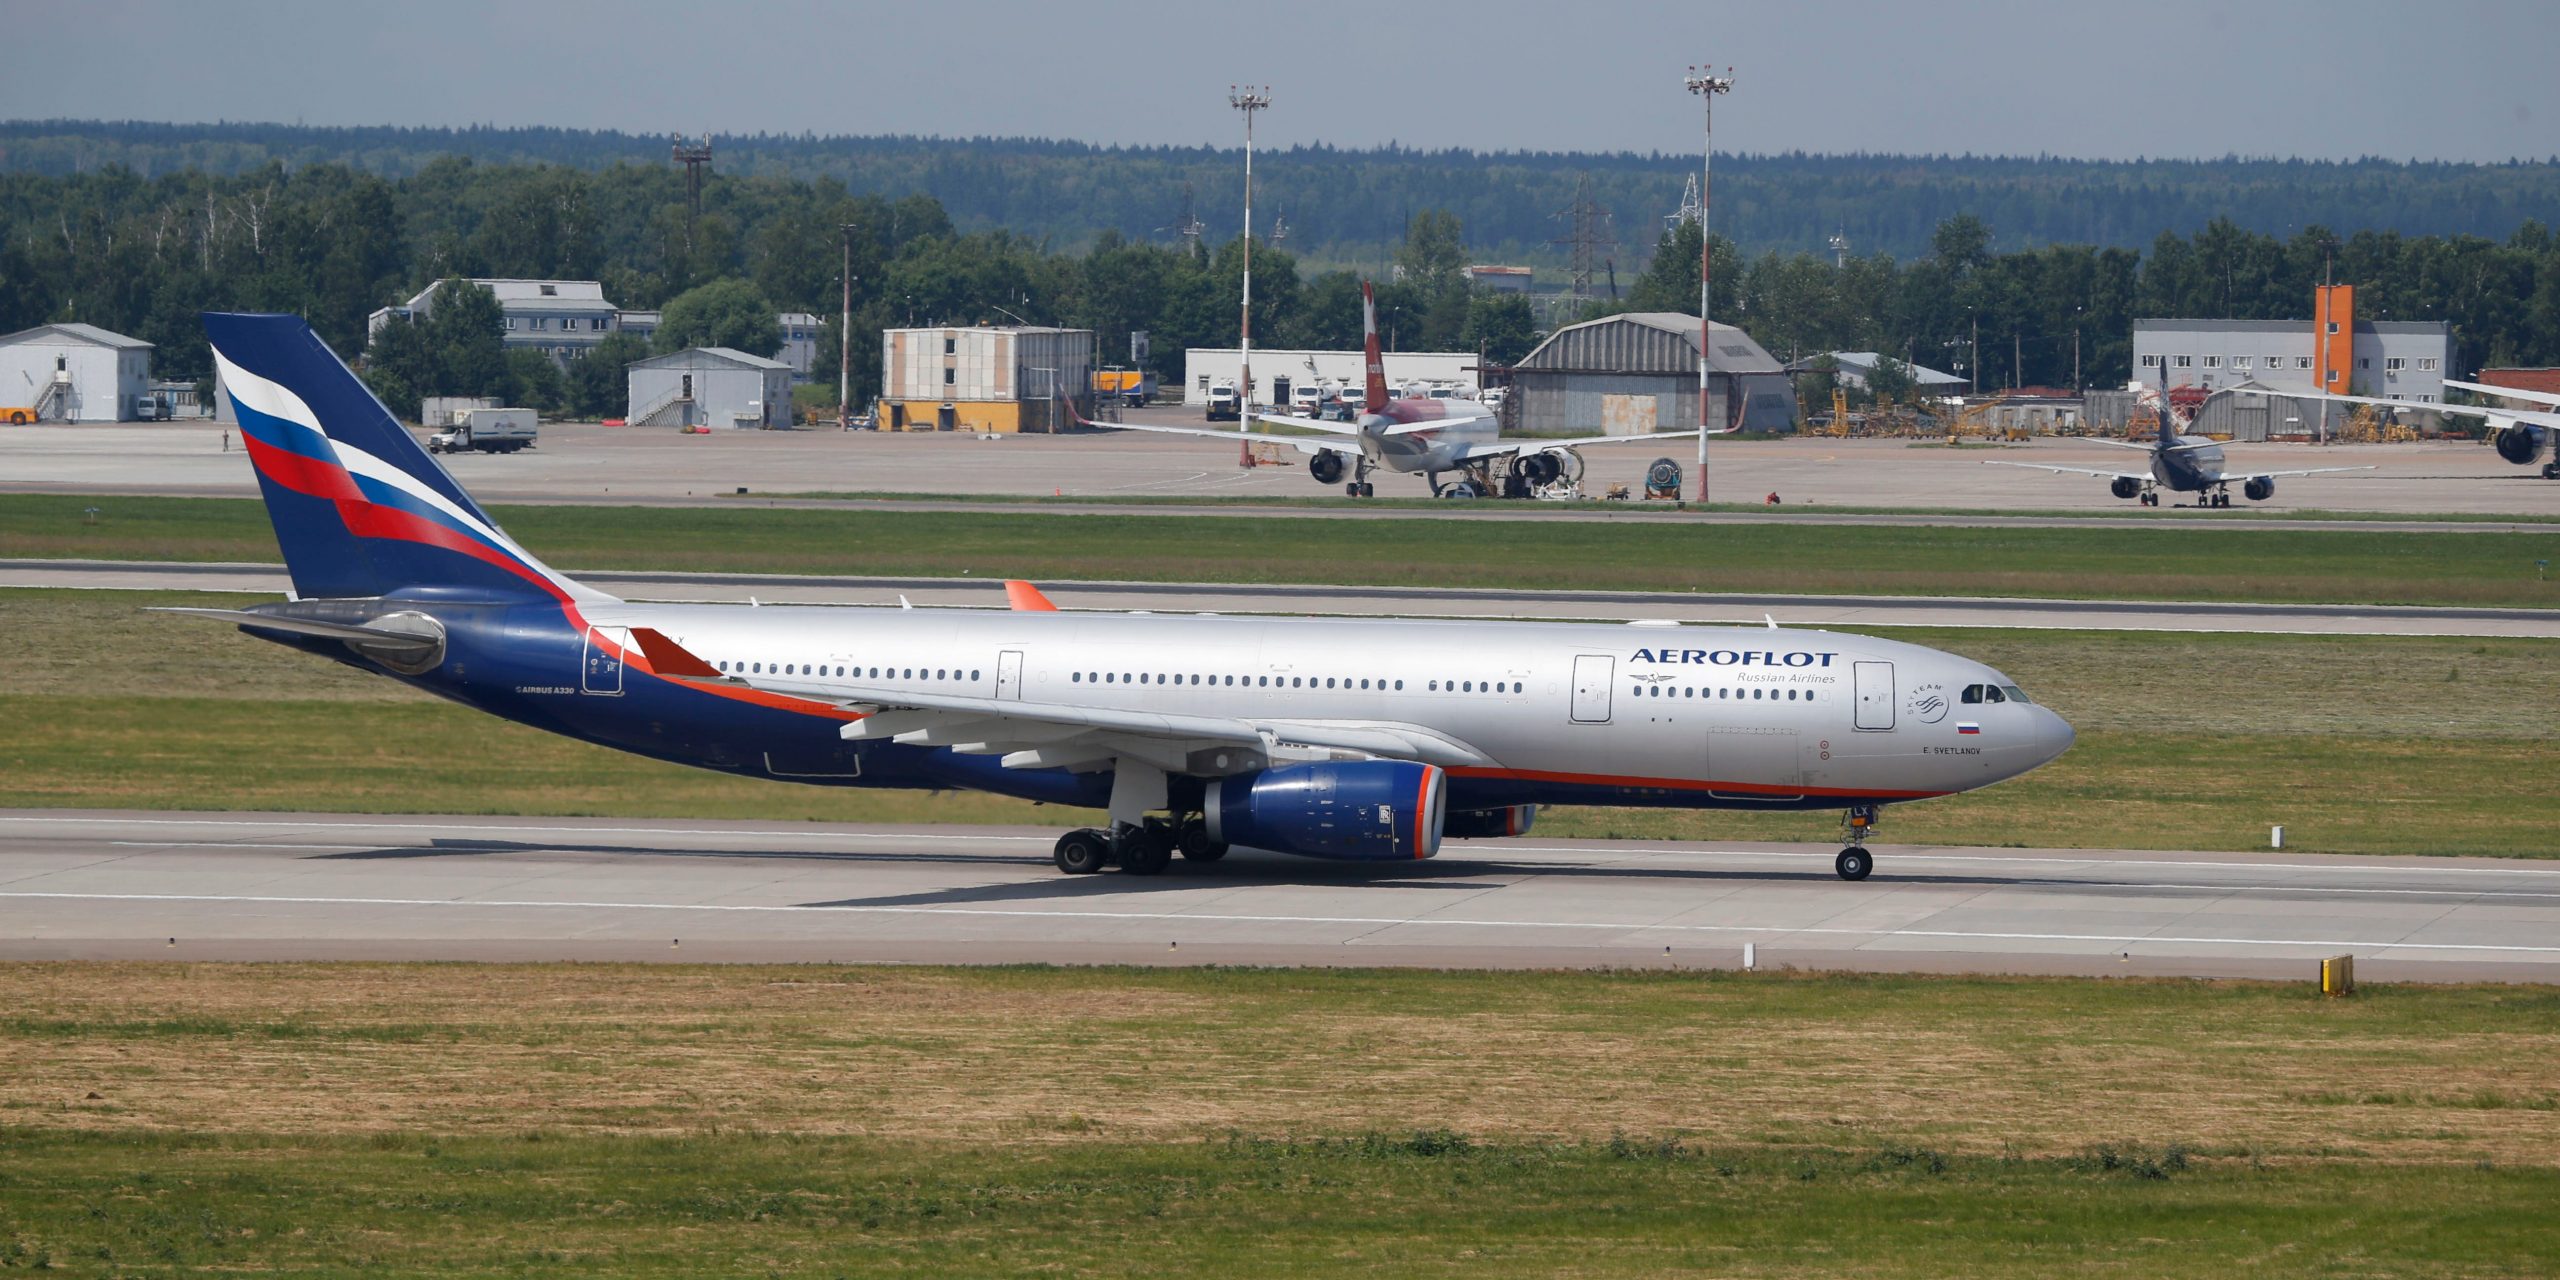 The Aeroflot Airbus A330 plane taxies out at Sheremetyevo airport, Moscow.